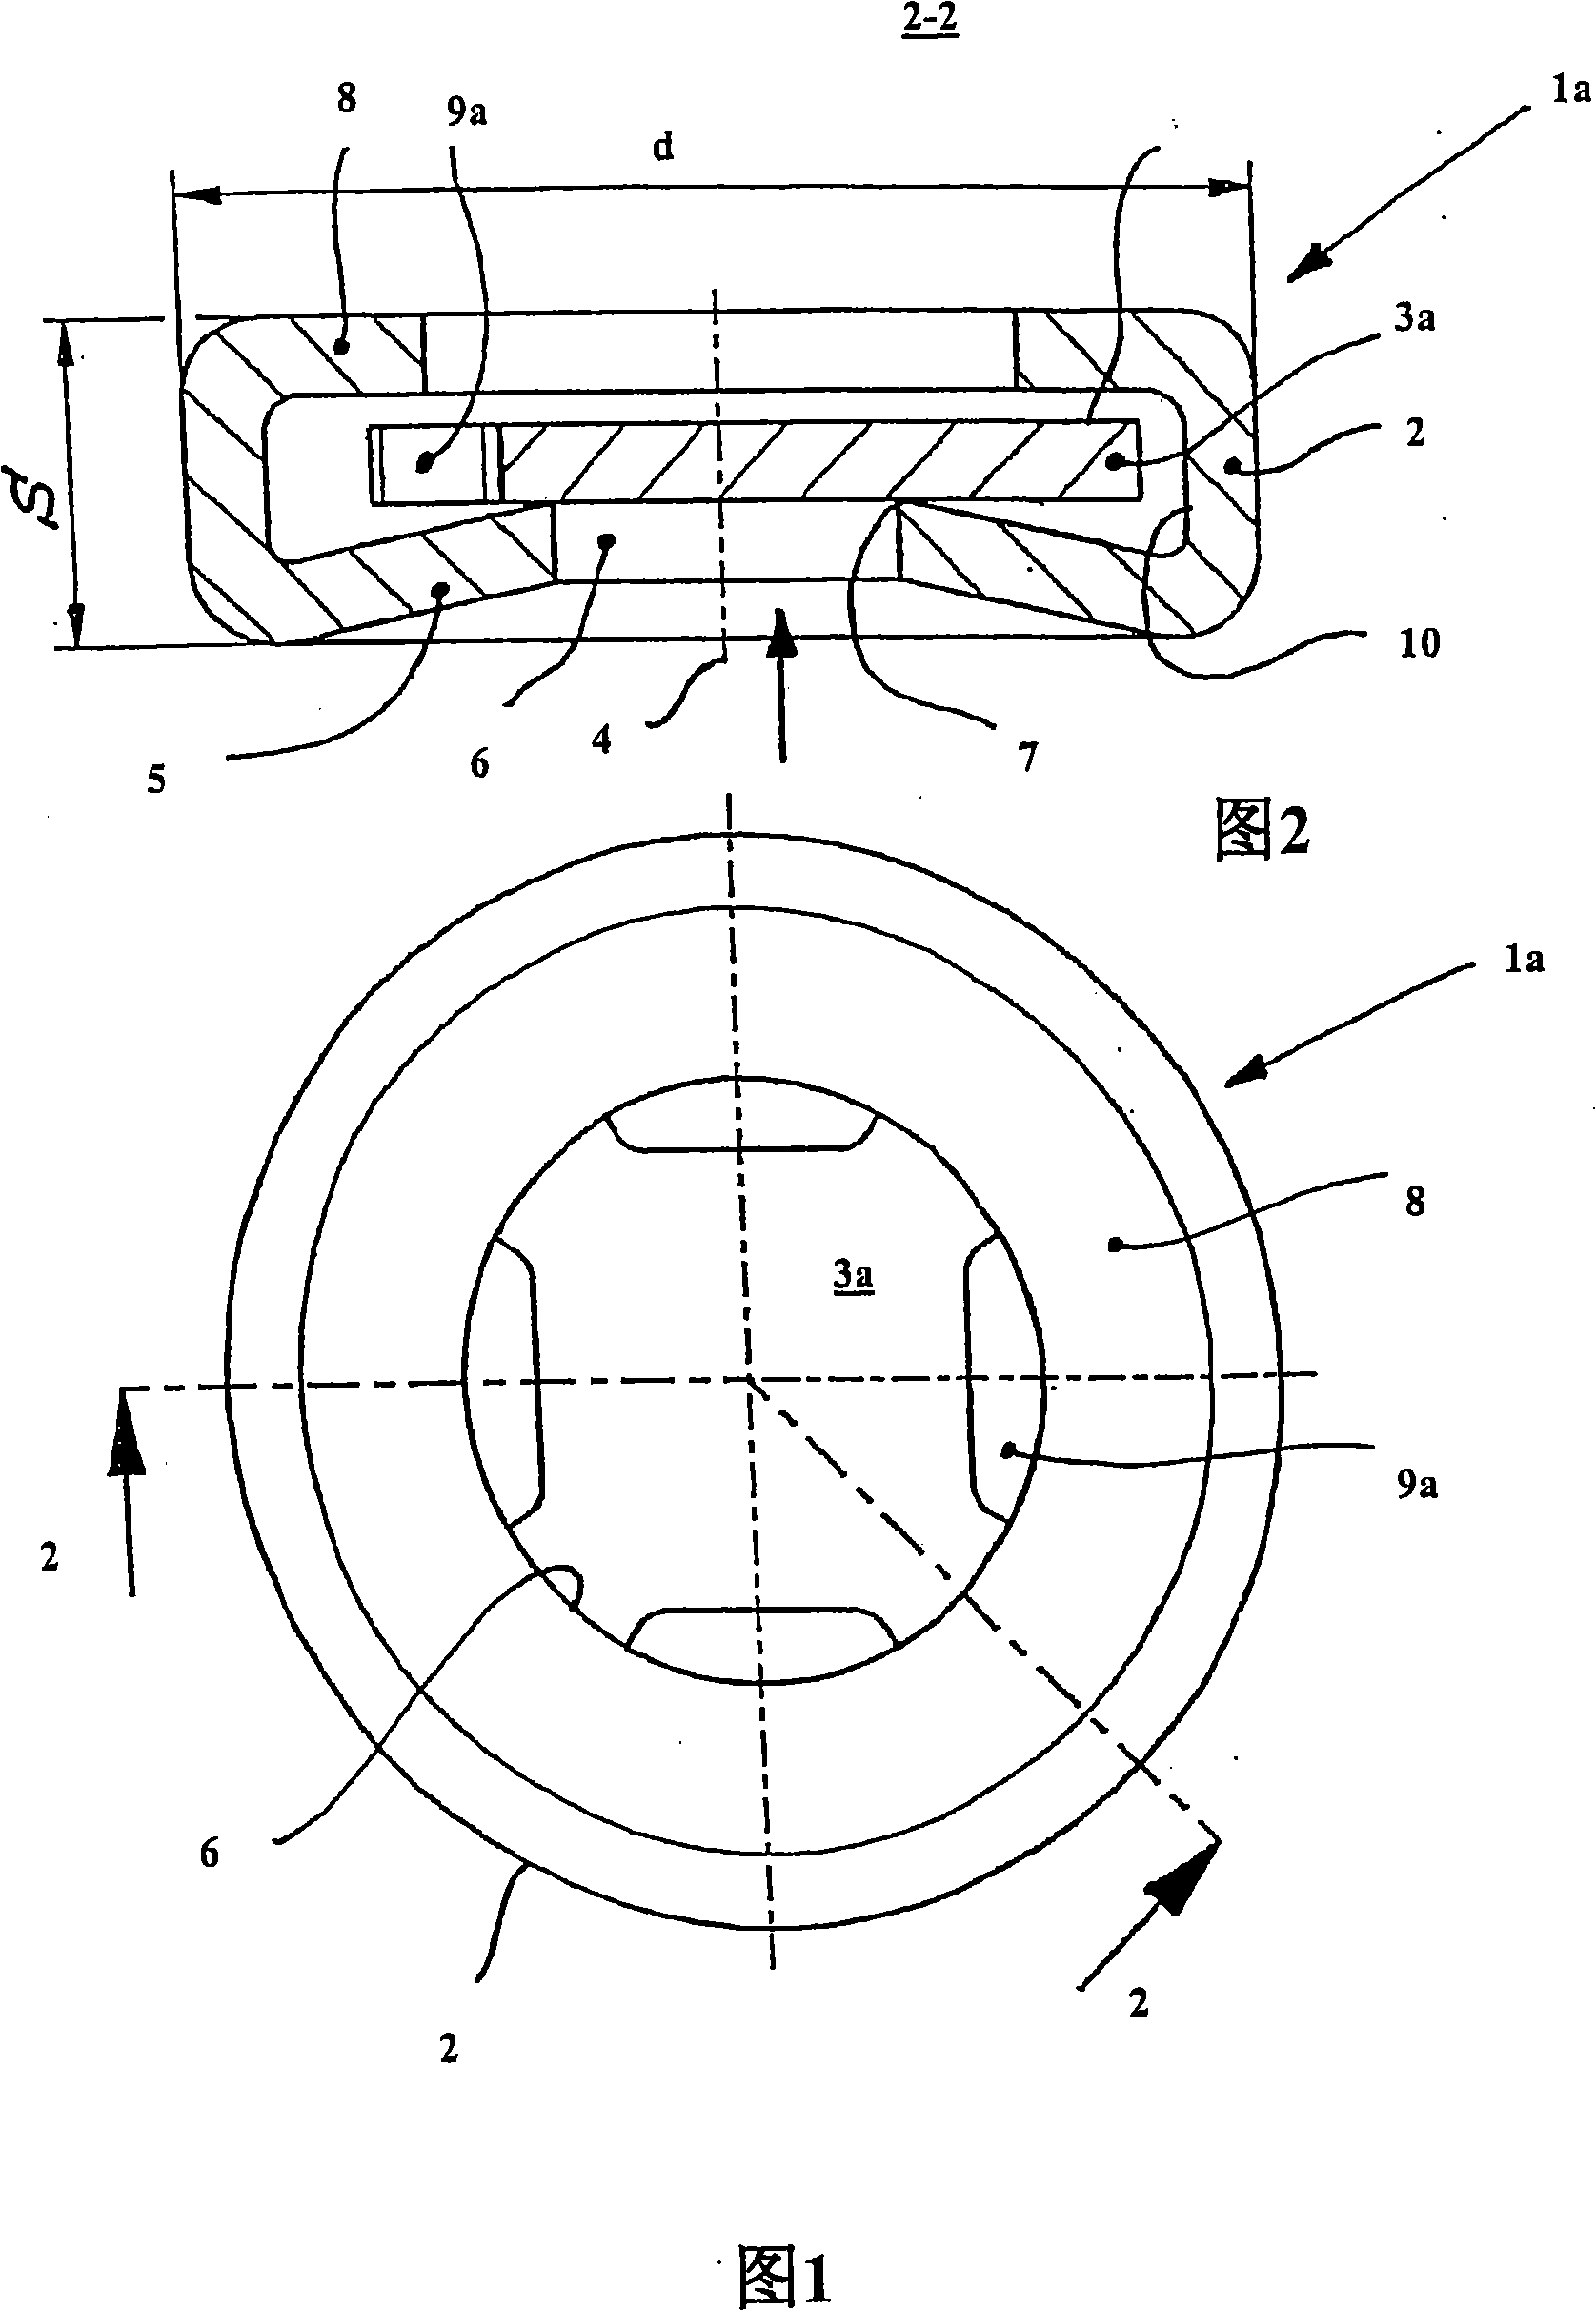 Plate valve for tensioining systems for traction means